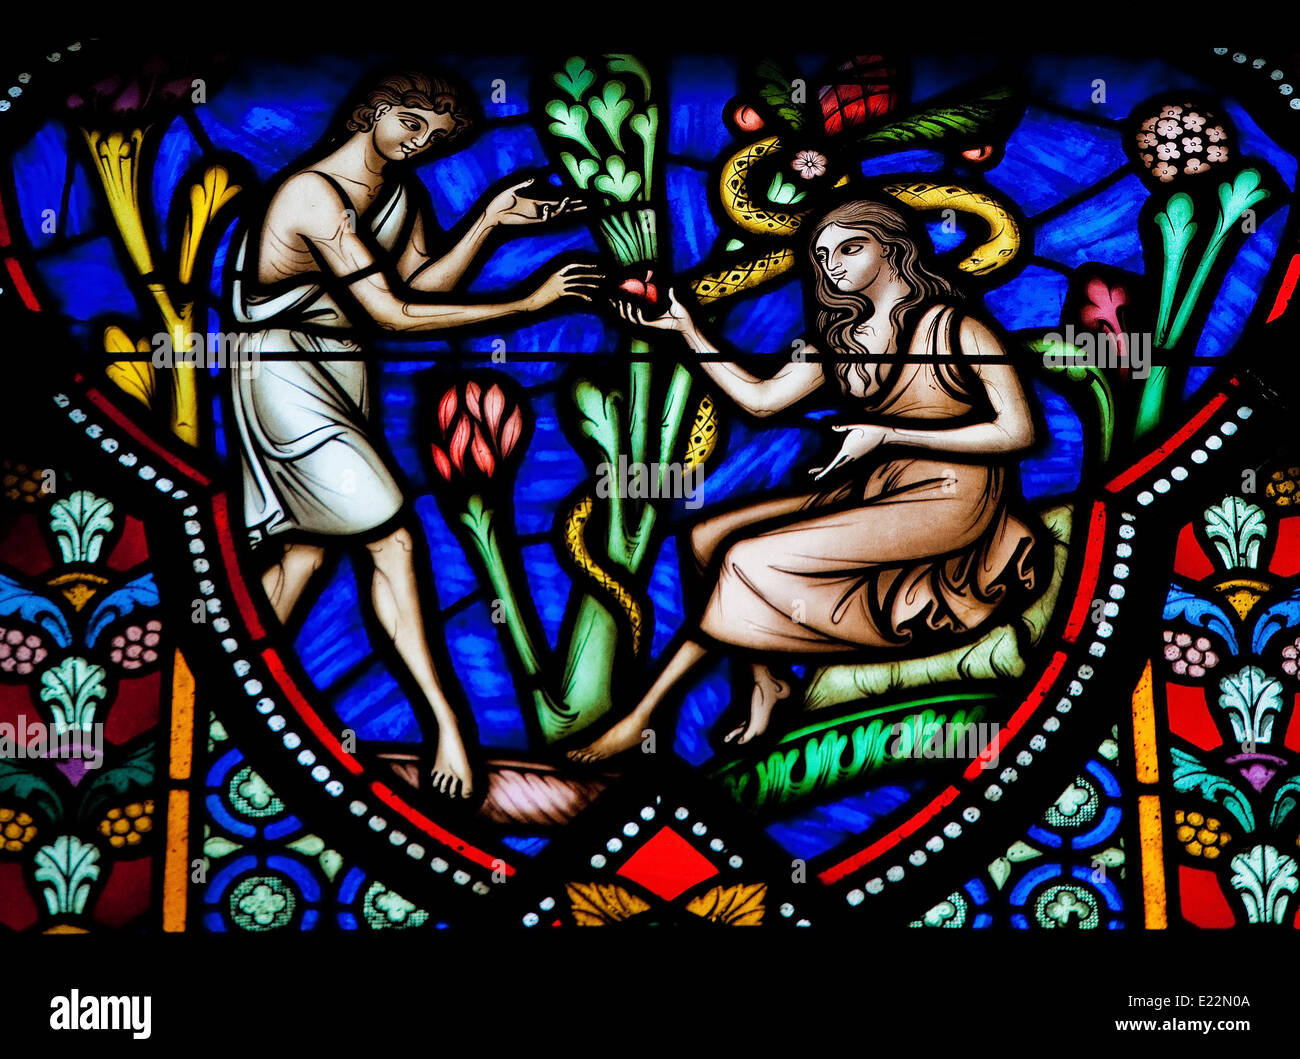 Adam And Eve Eating The Forbidden Fruit In The Garden Of Eden On A Stained Glass Window In The 4000